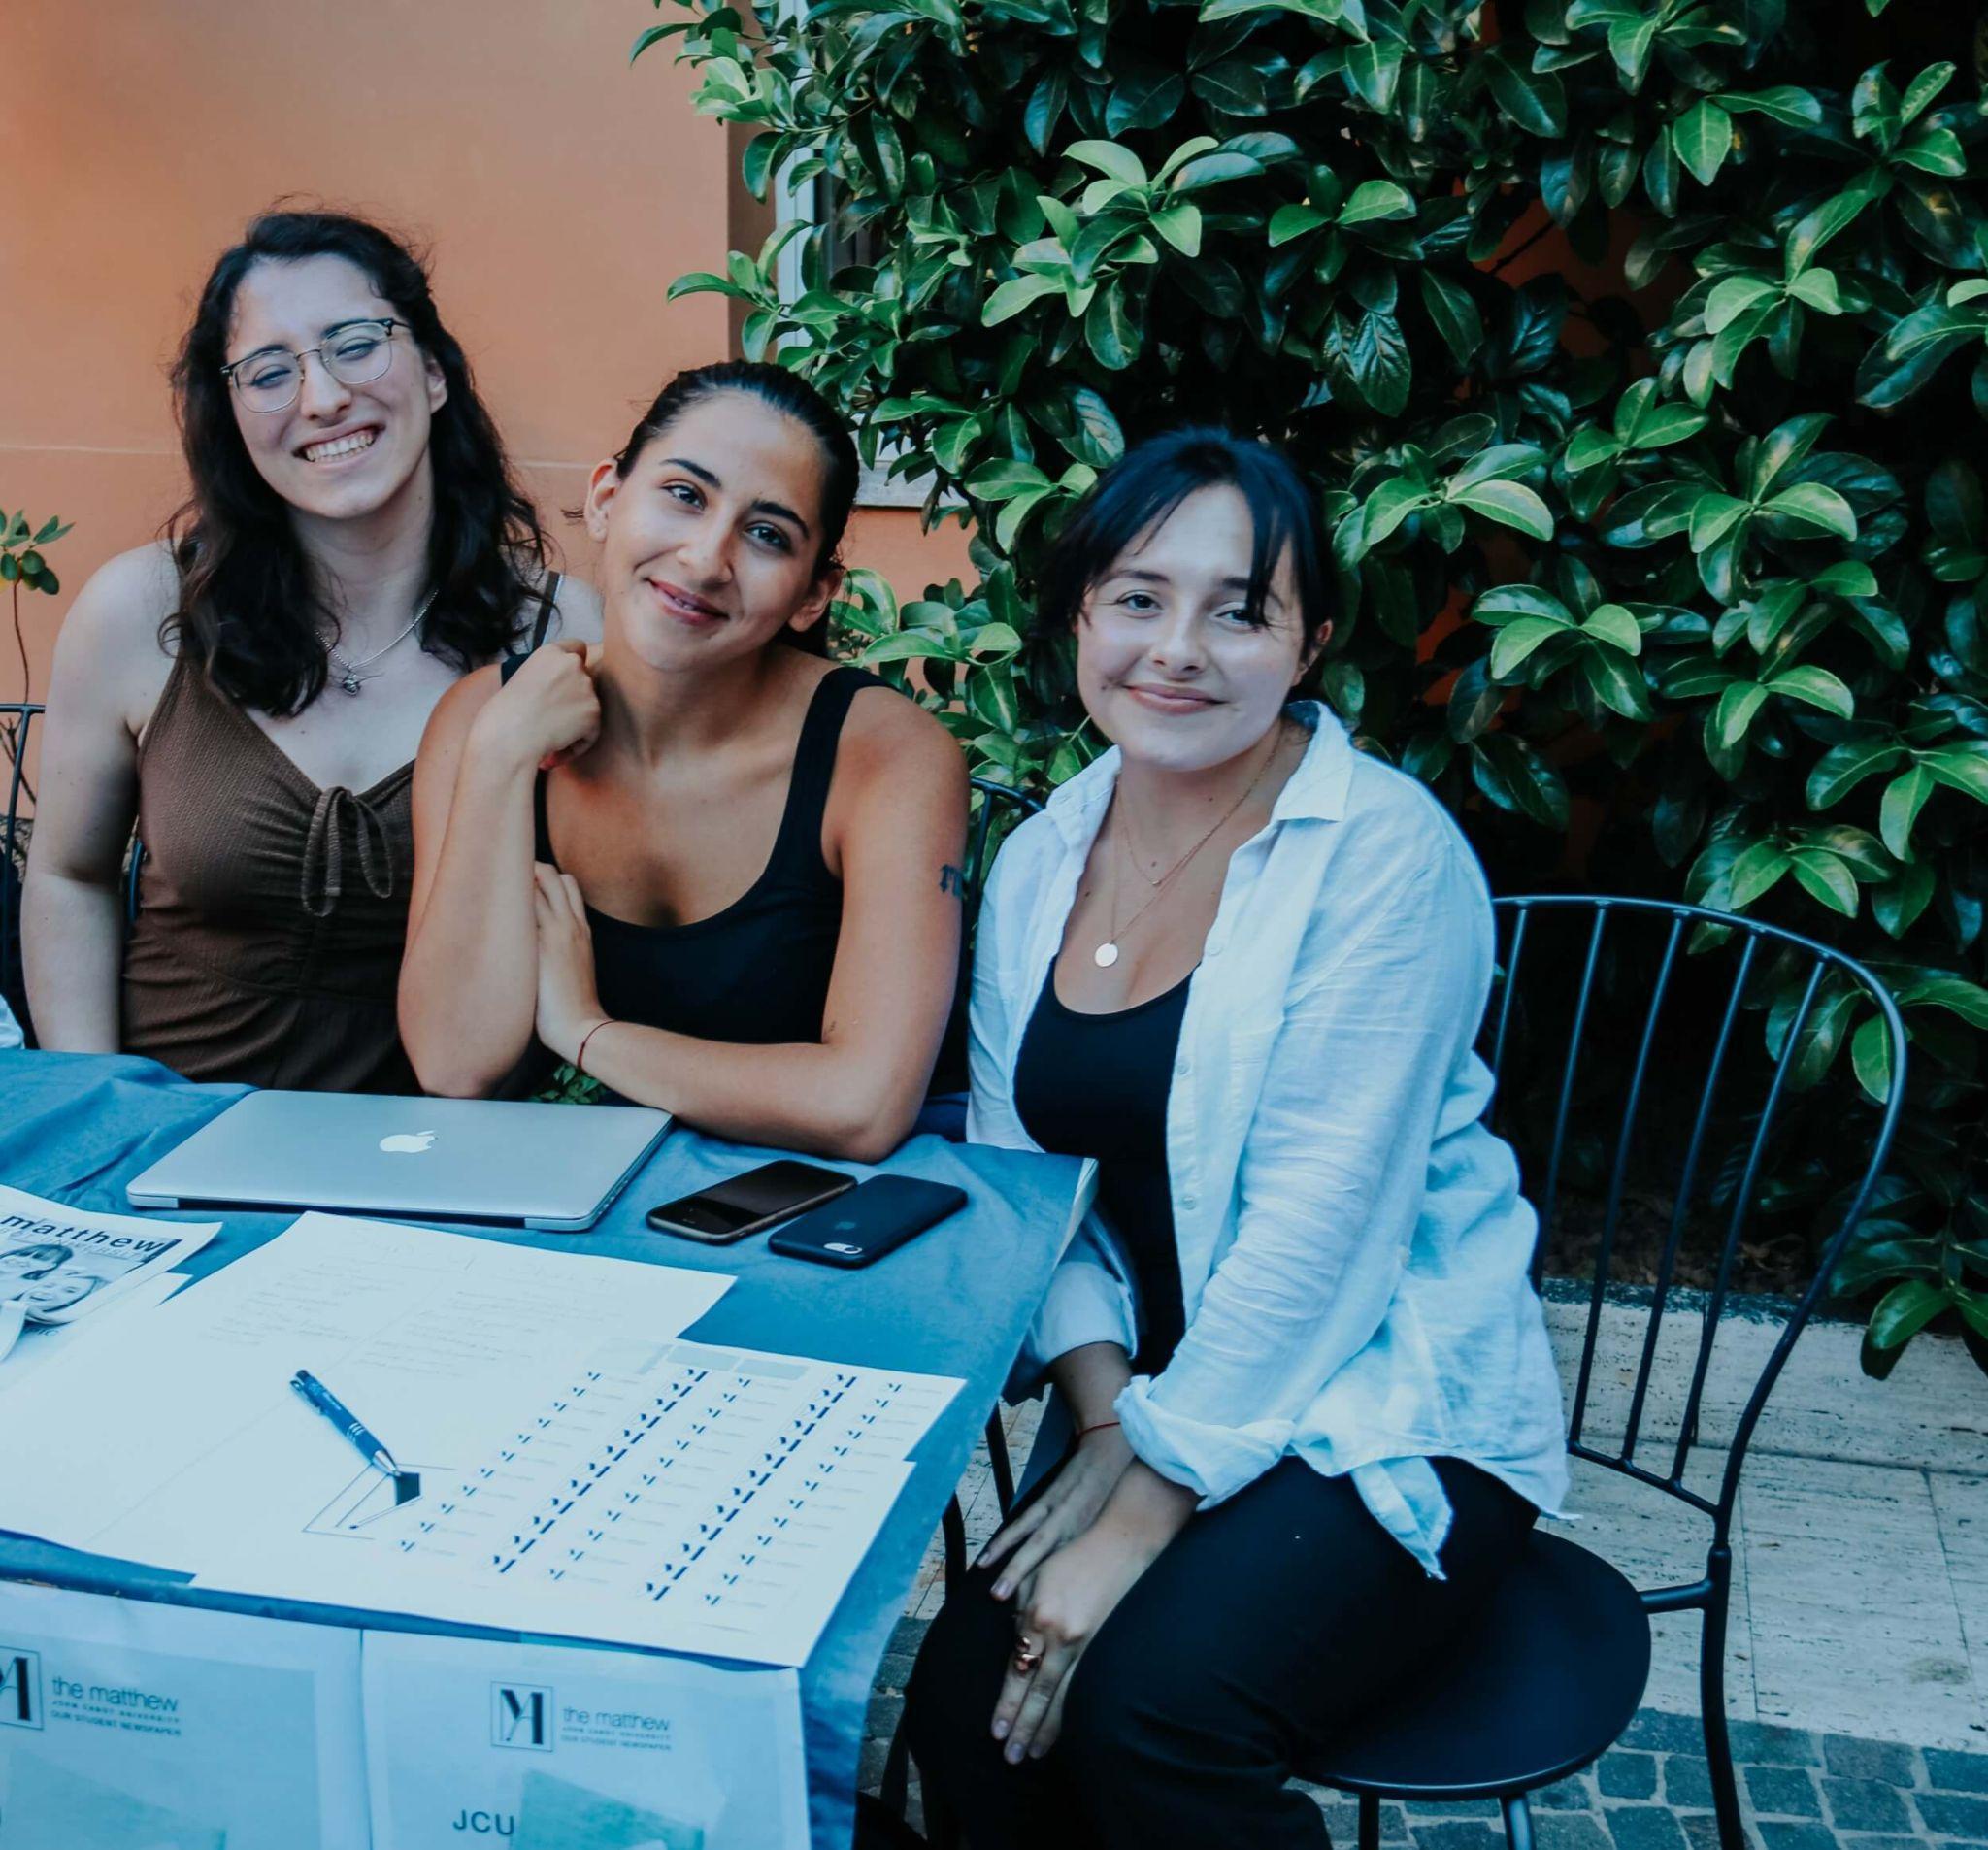 Three students smile at a registration table with materials, representing vibrant community life during their study abroad in Rome.